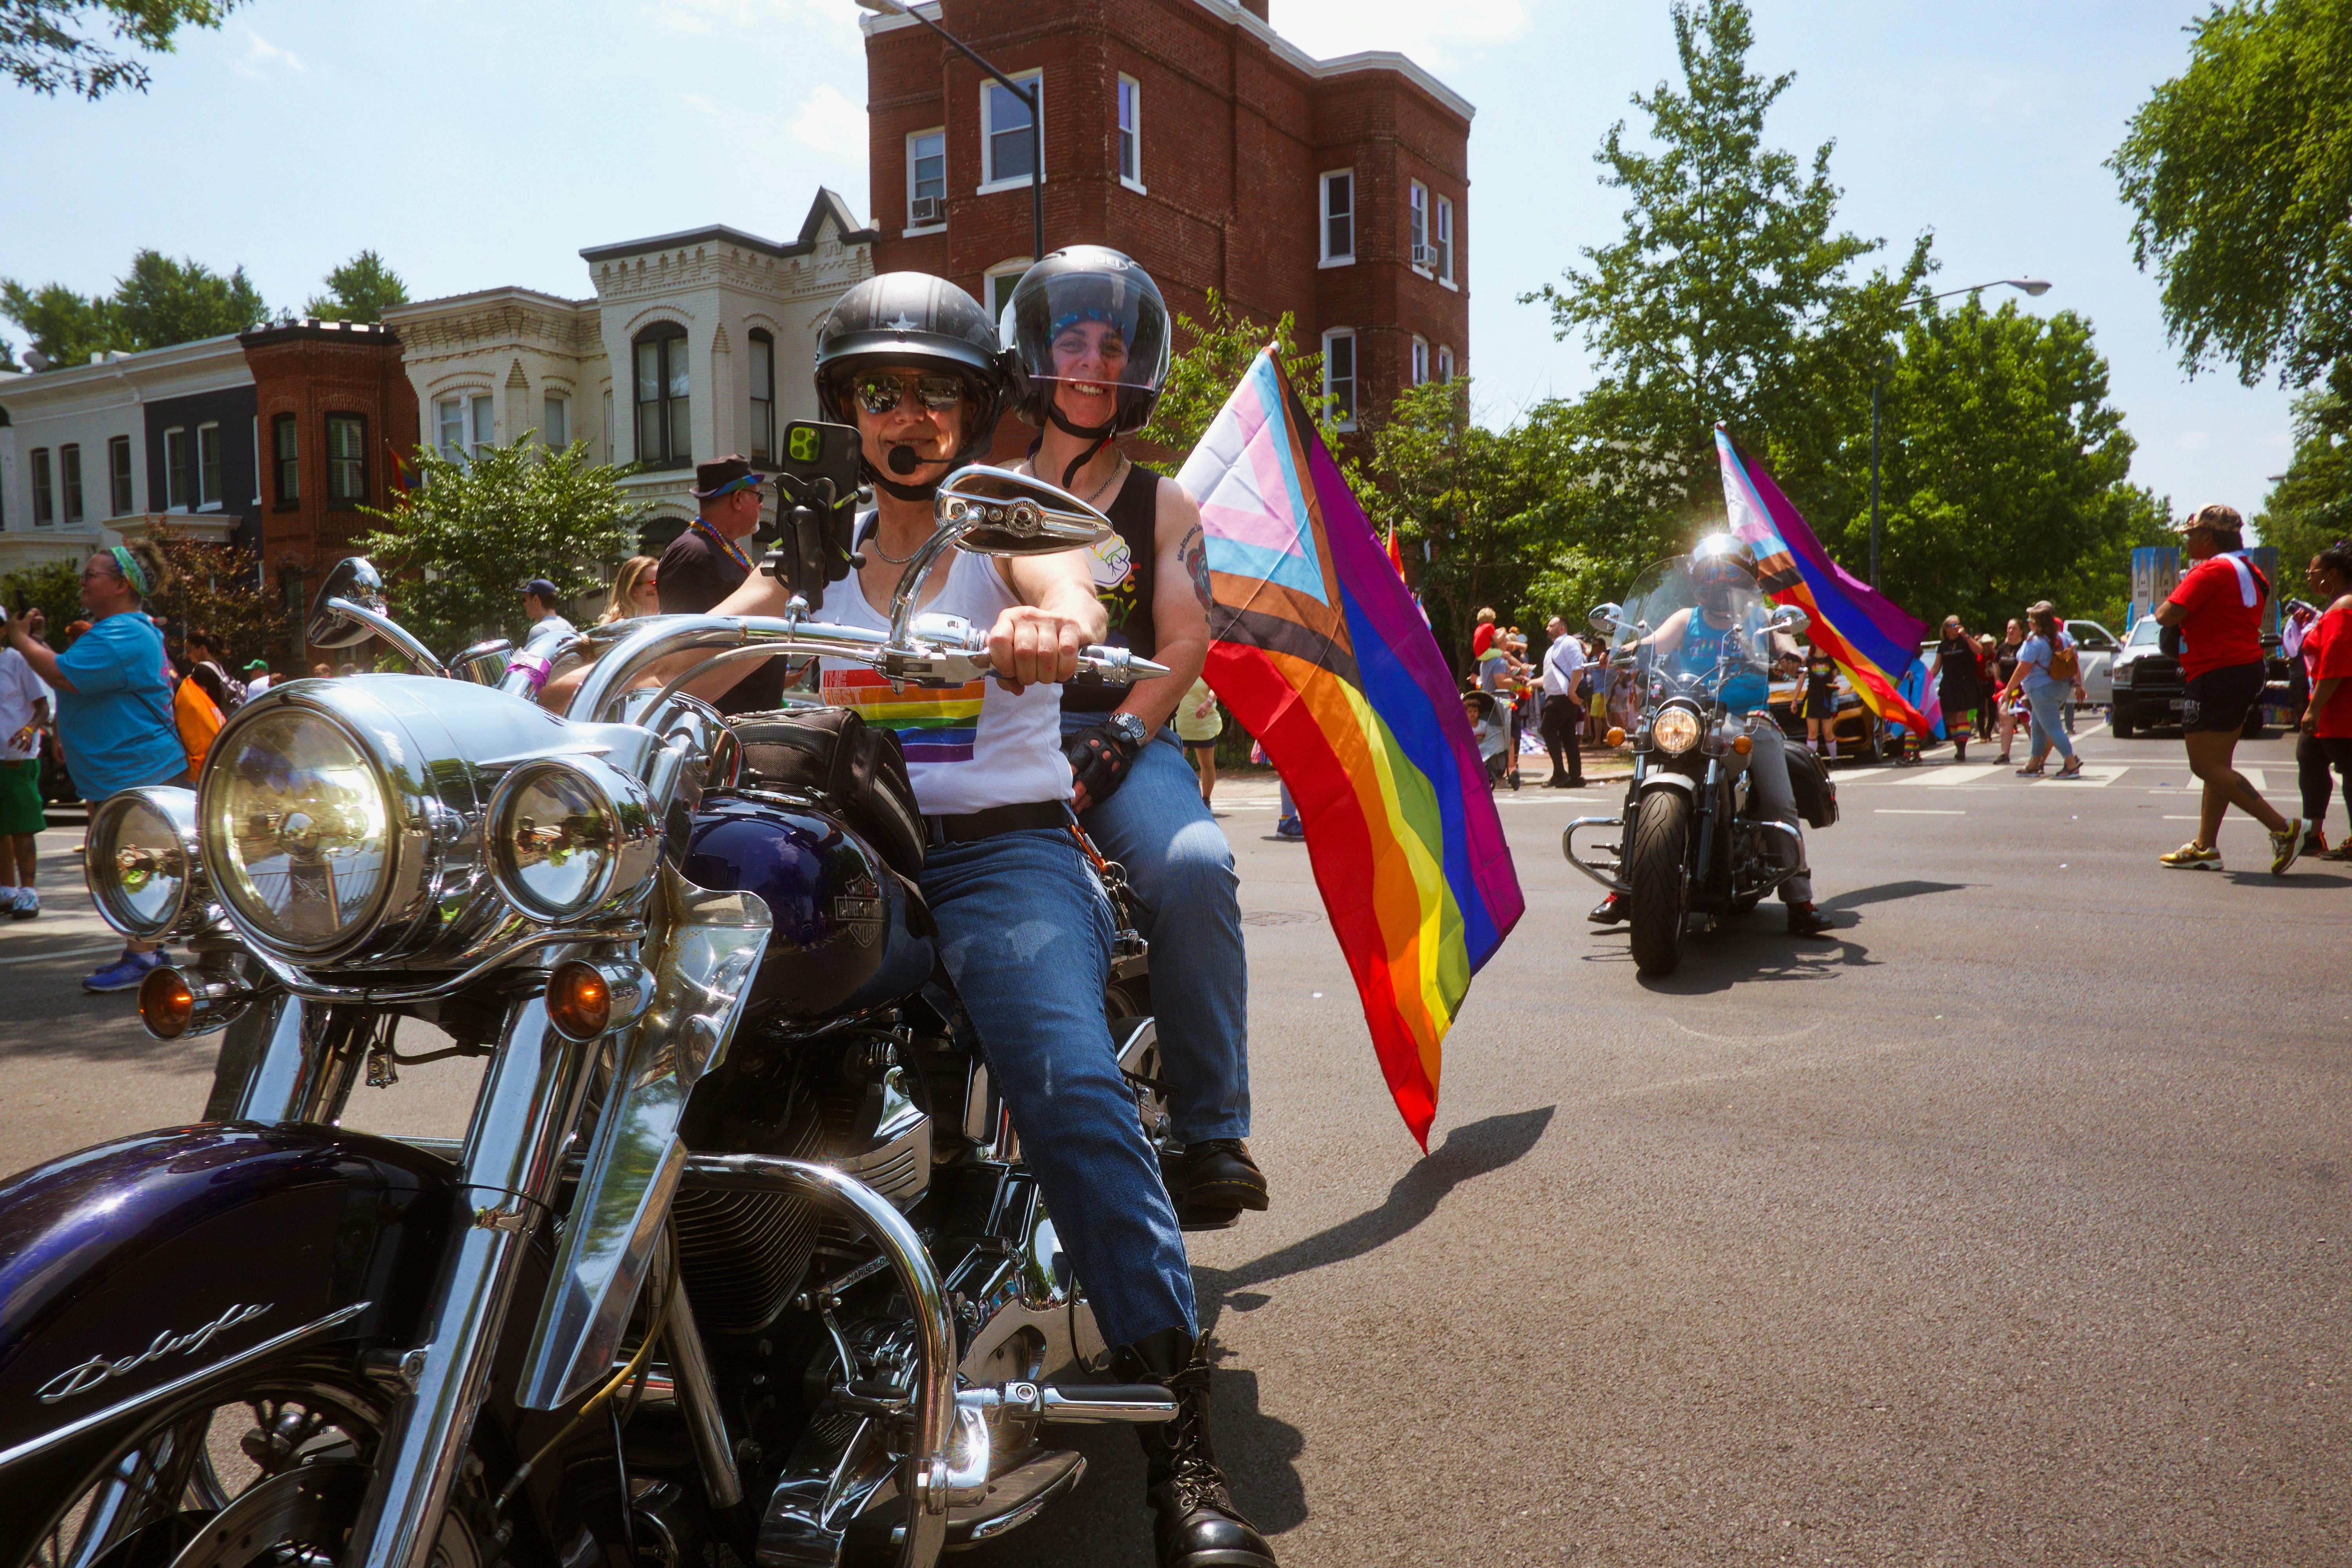 Two queer people smiling on the back of a motorcycle flying a trans-inclusive pride flag.